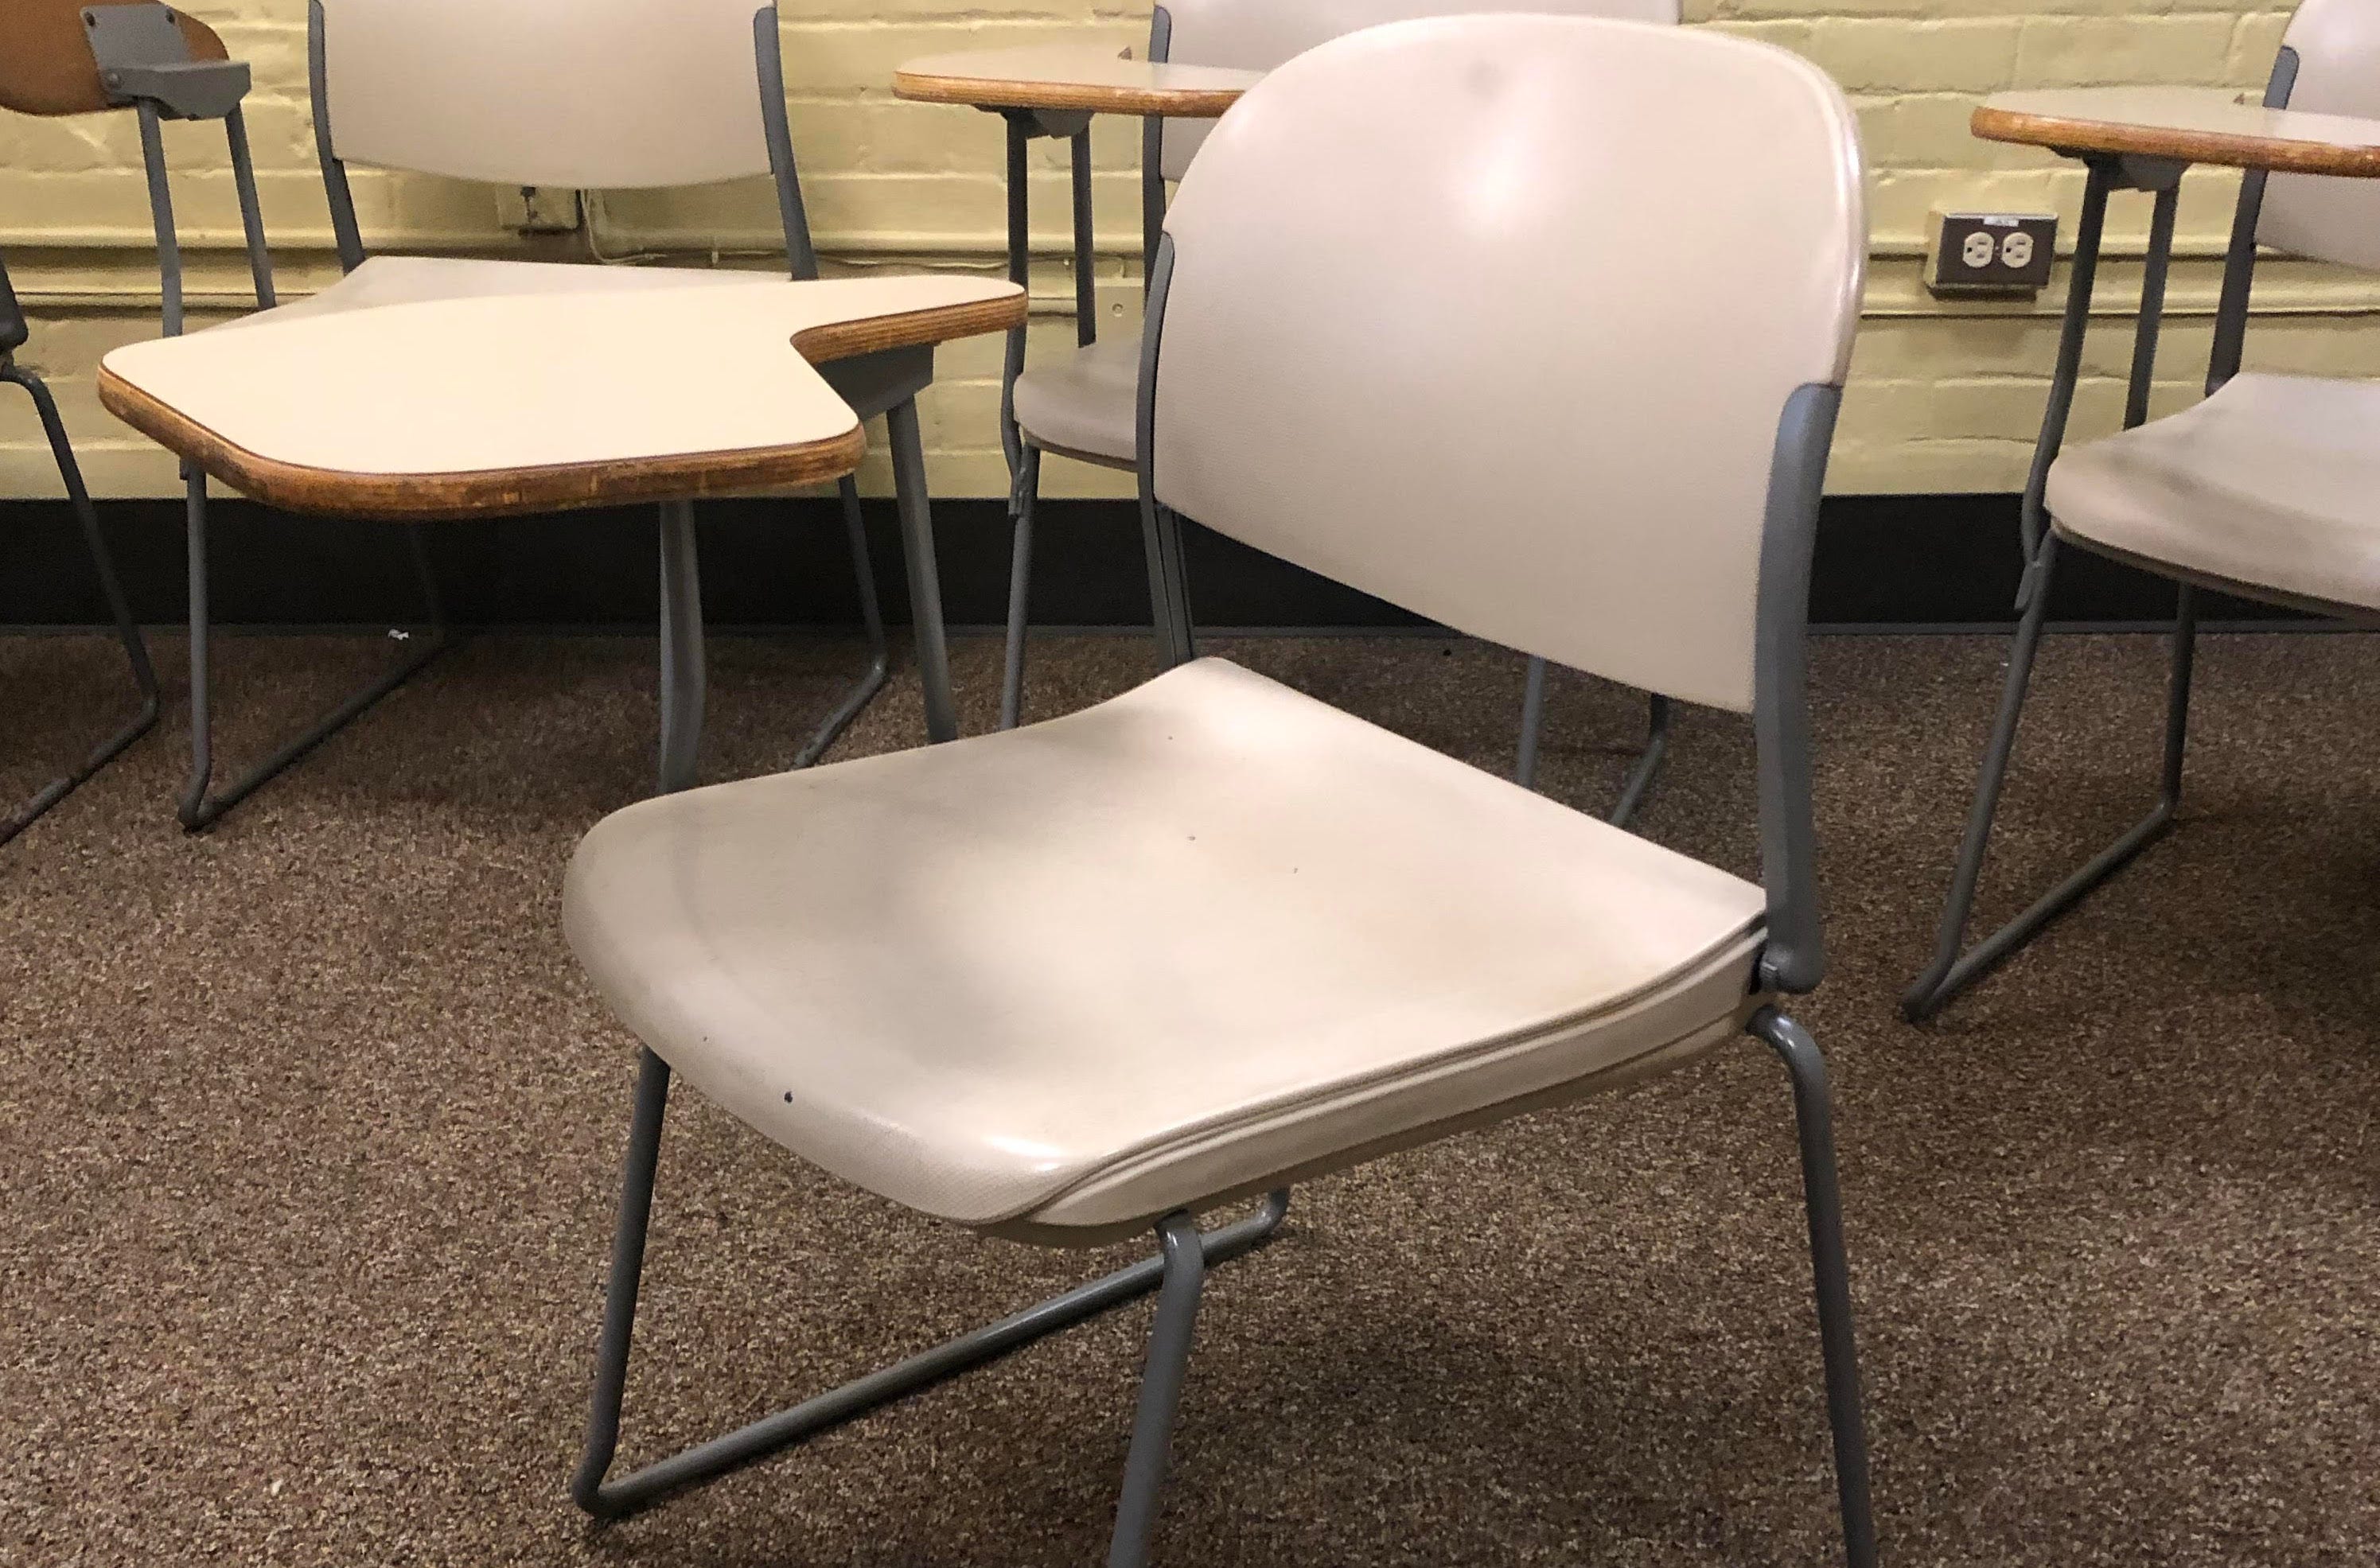 Why Do People Buy Combo Desks School Desk Desk And Chair